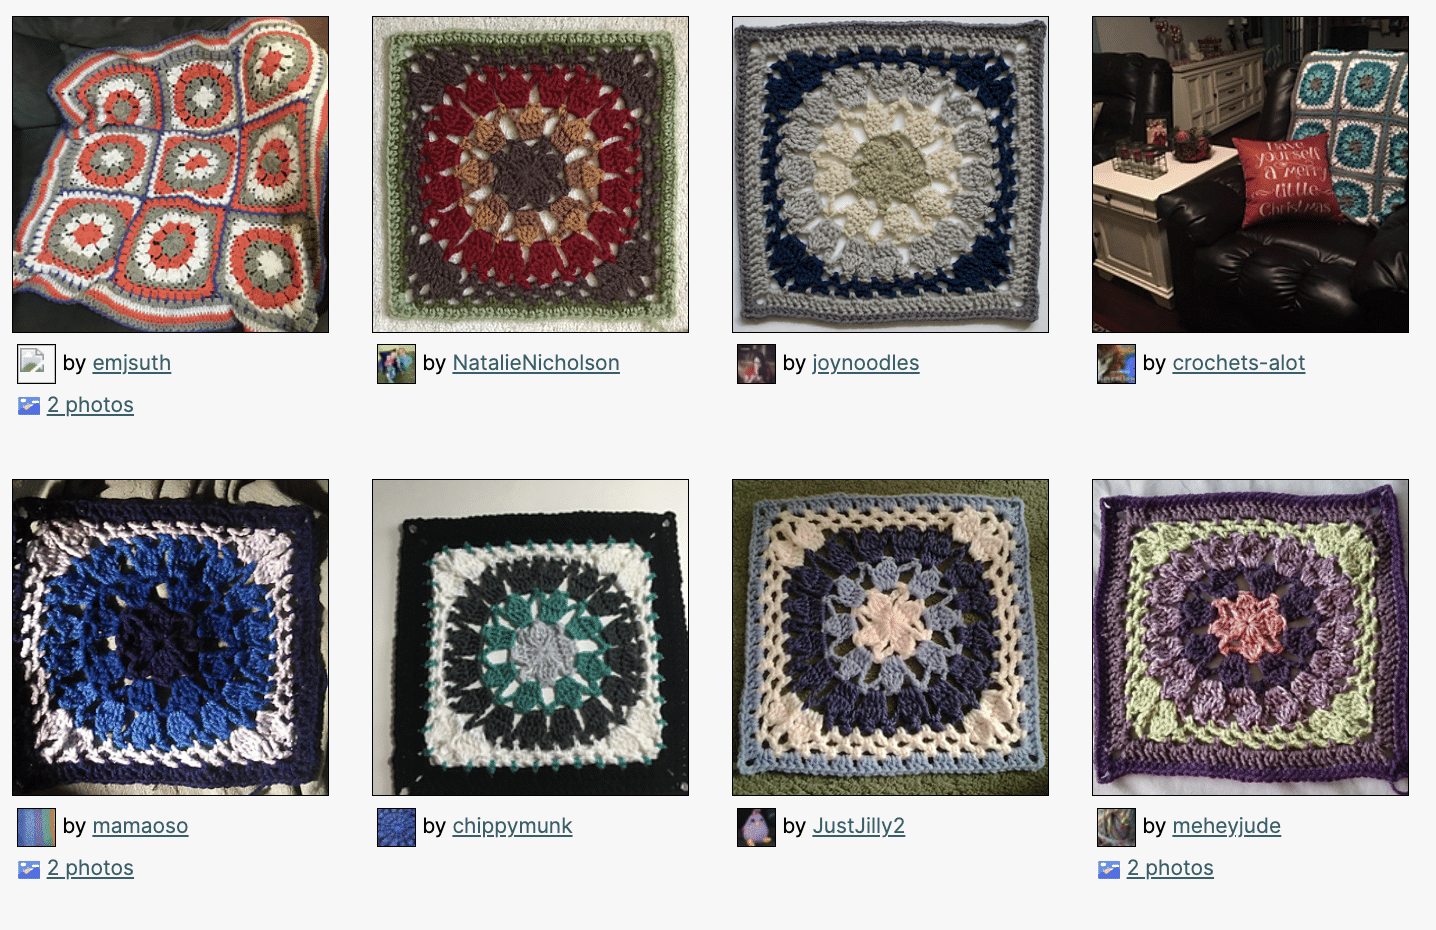 Vanna's Afghan Crochet Square - Ravelry Projects - American Crochet Association